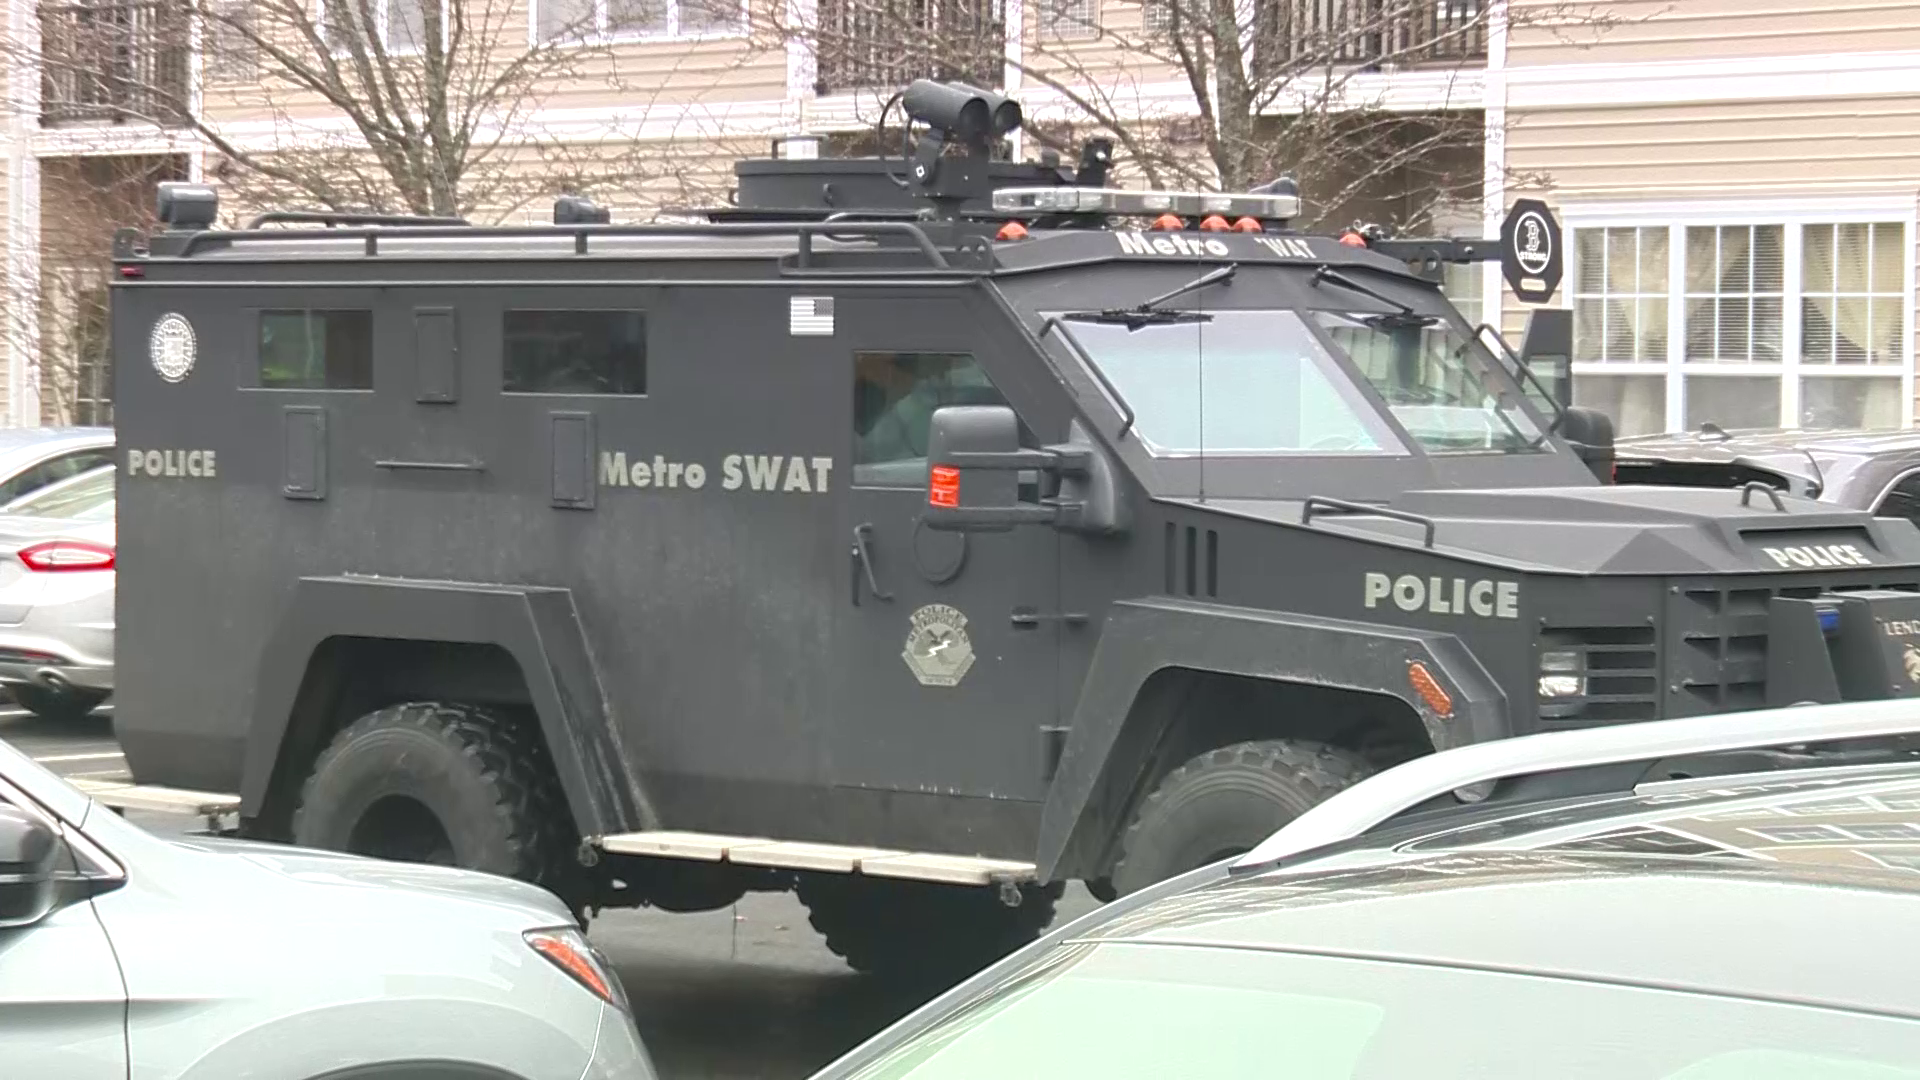 Police Arrest Barricaded Subject In Hingham Who Shot At Swat Vehicle